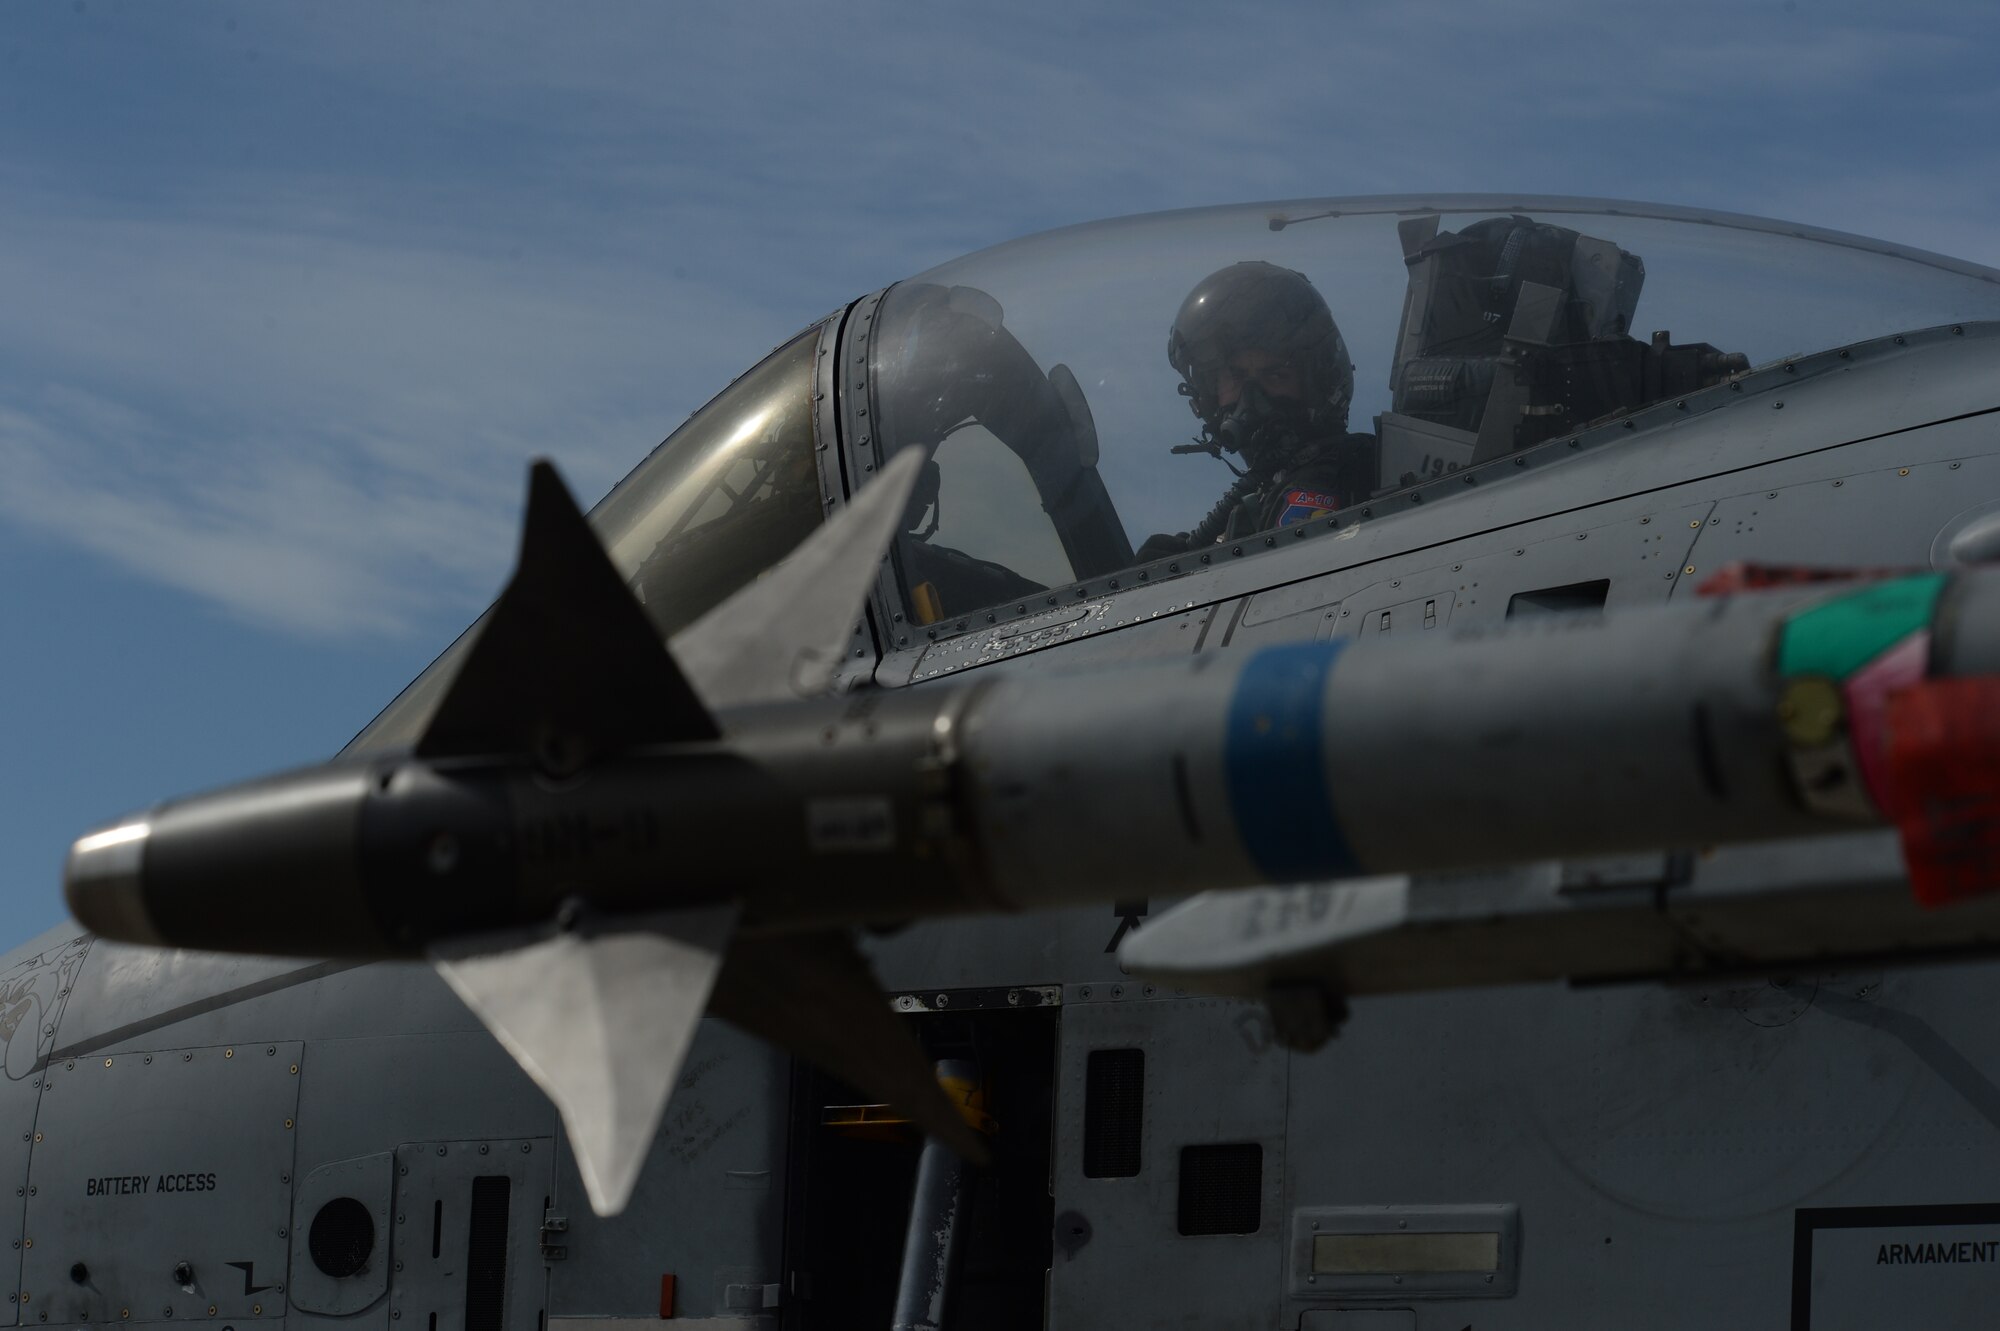 A U.S. Air Force A-10 Thunderbolt II pilot assigned to the 354th Expeditionary Fighter Squadron looks back from the cockpit of his aircraft before taxiing on the runway during a theater security package deployment at Campia Turzii, Romania, April 14, 2015. The aircraft will conduct training alongside NATO allies to strengthen interoperability and demonstrate U.S. commitment to the security and stability of Europe.  (U.S. Air Force photo by Staff Sgt. Joe W. McFadden/Released)